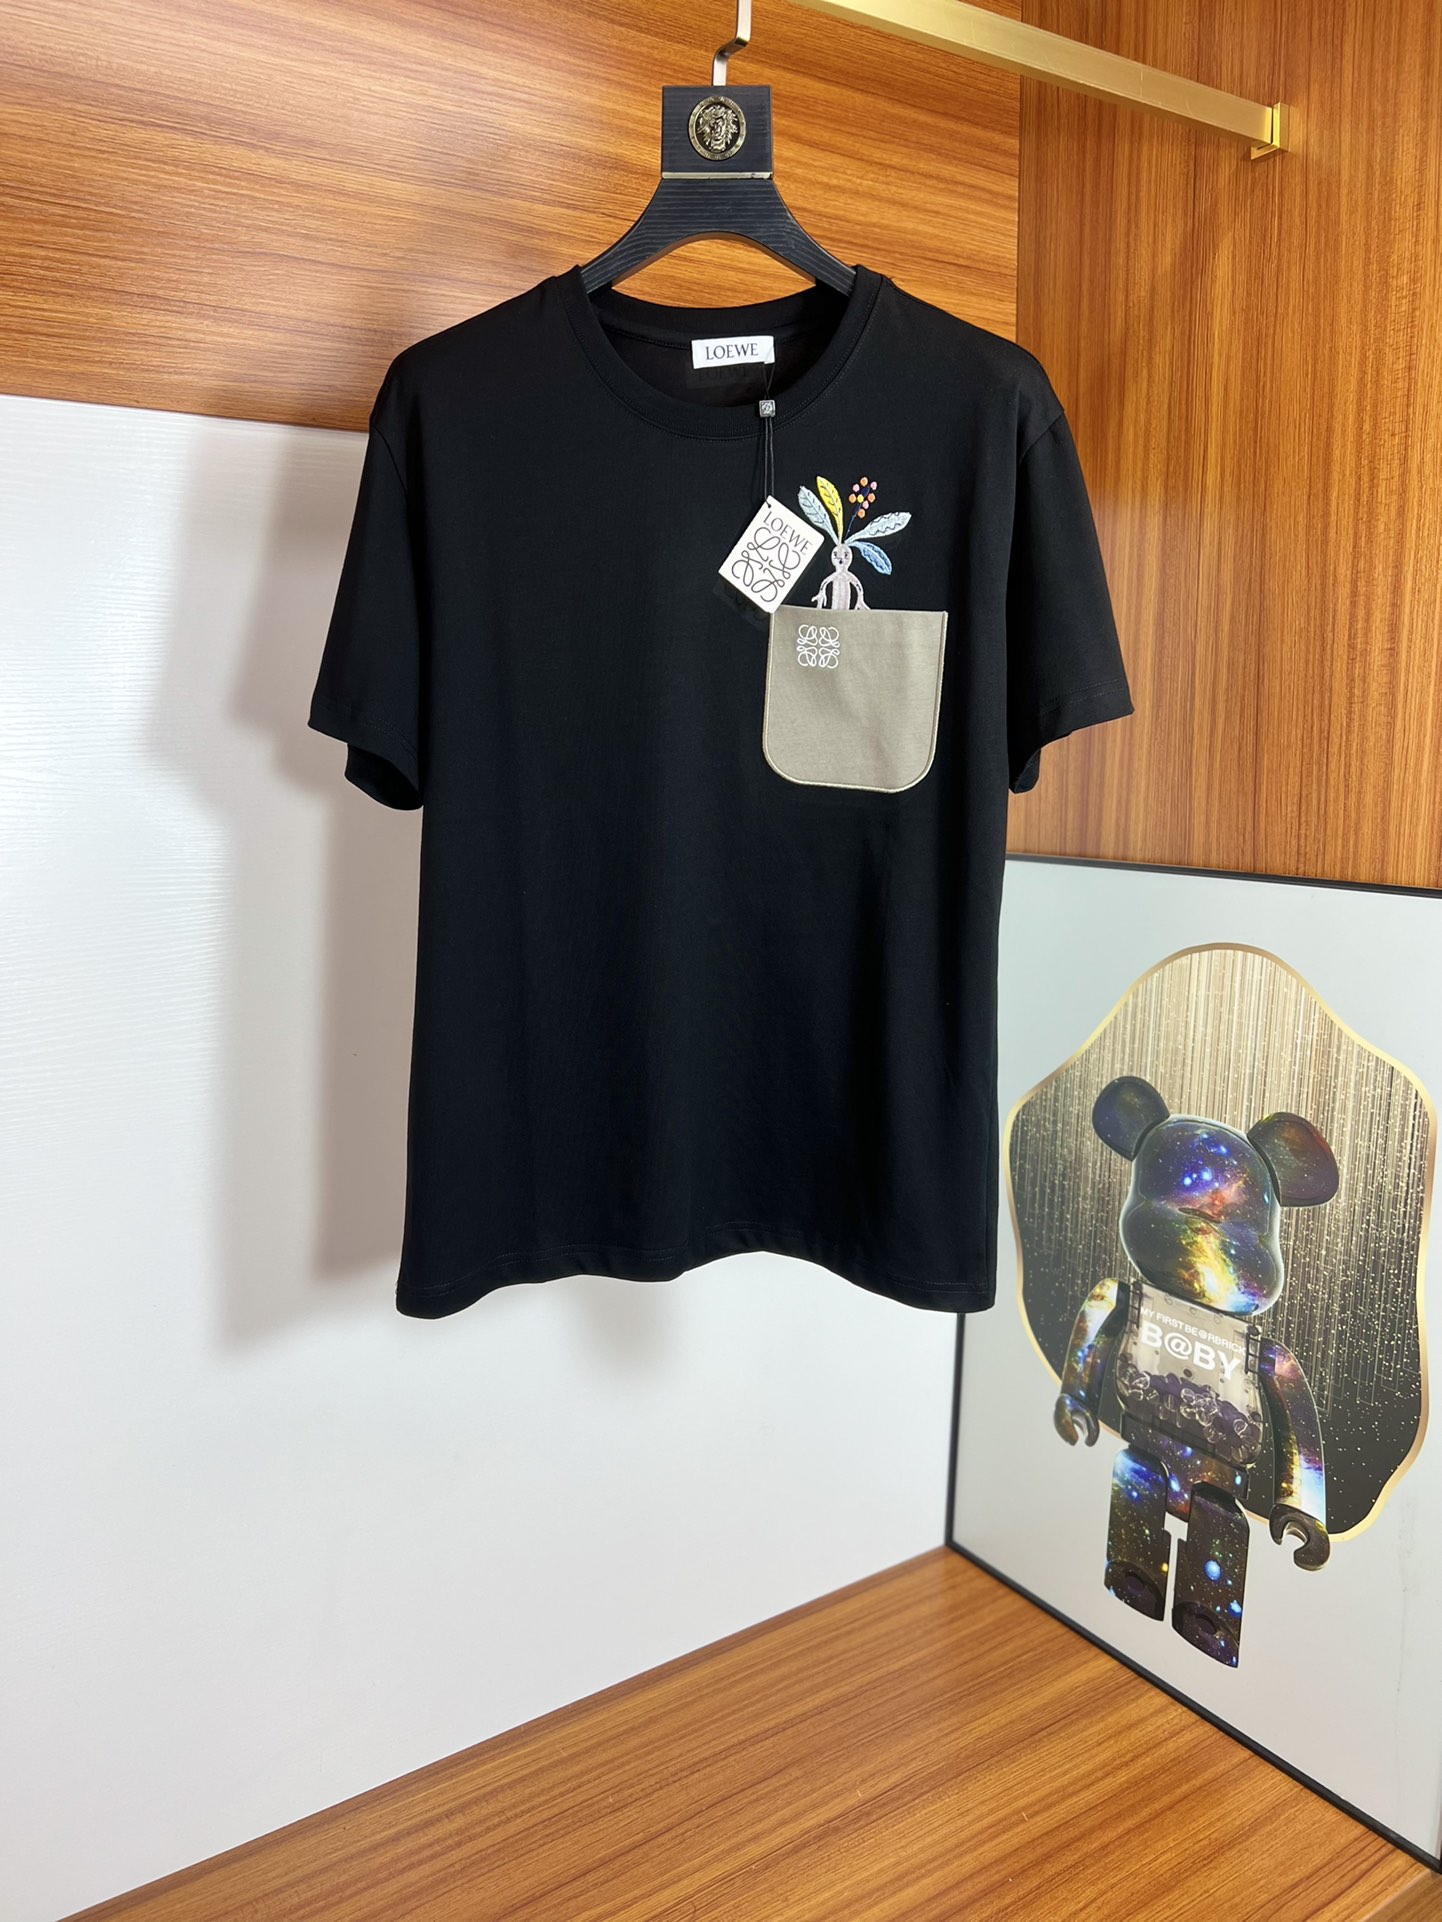 Loewe Clothing T-Shirt Spring/Summer Collection Short Sleeve